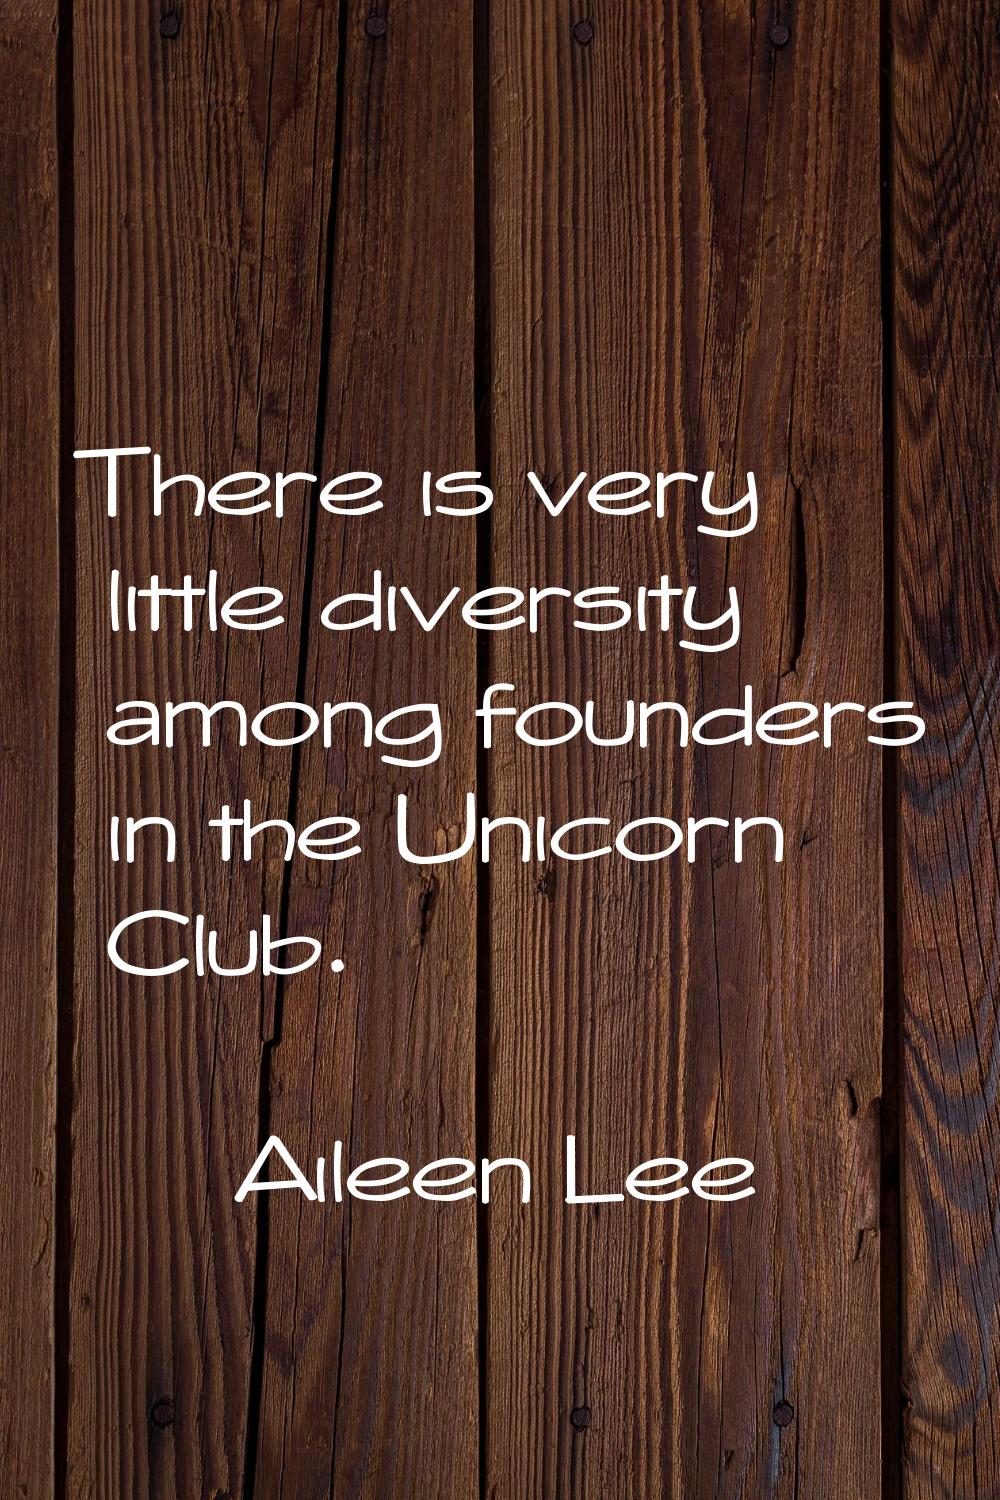 There is very little diversity among founders in the Unicorn Club.